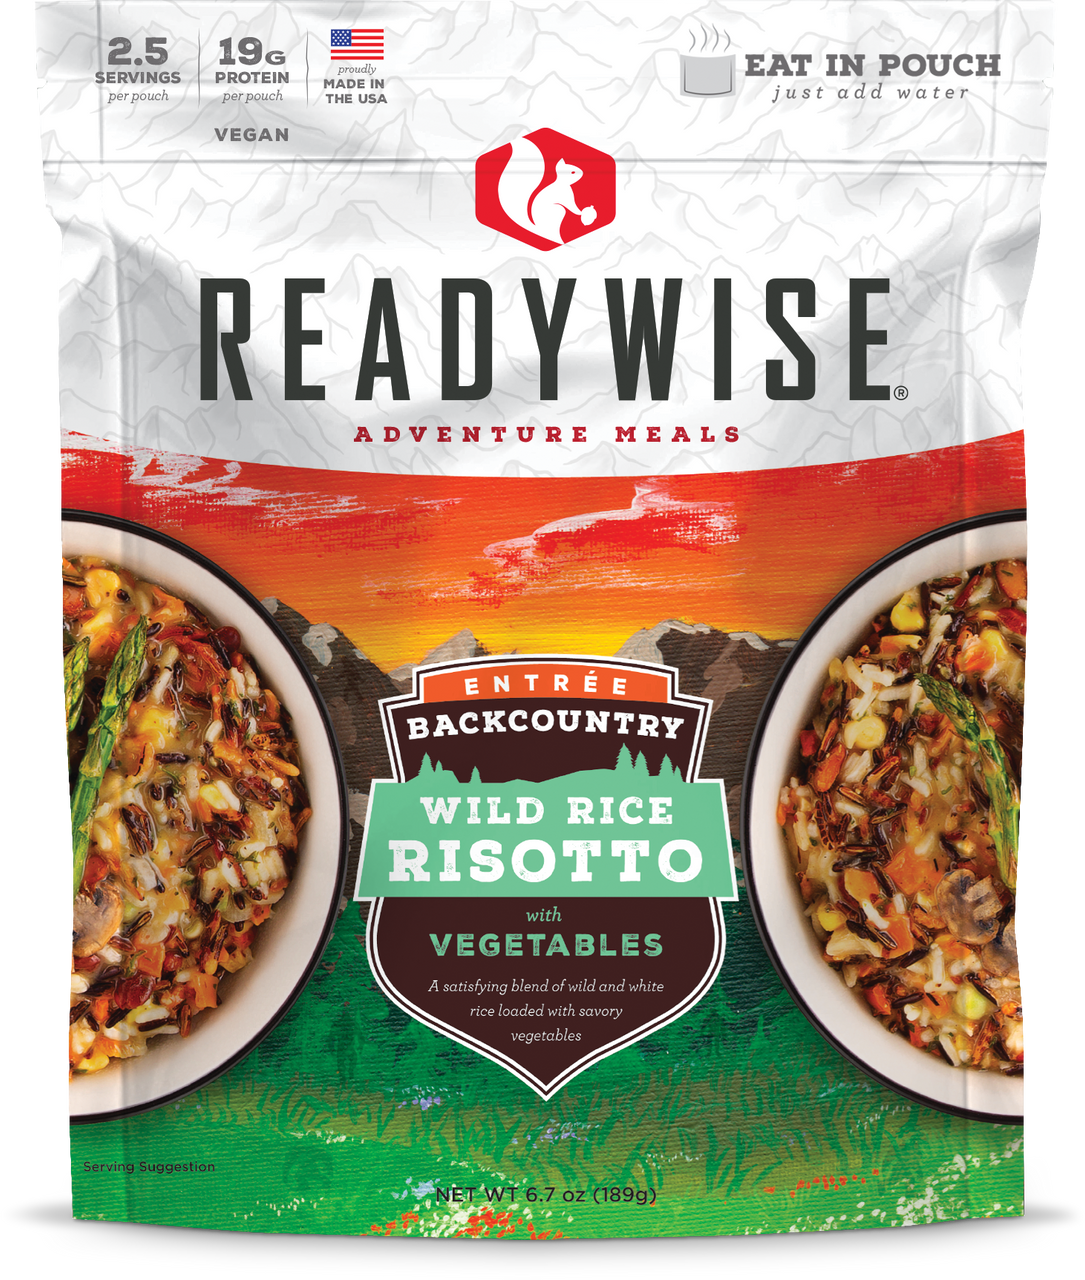 6 Pack Case Backcountry Wild Rice Risotto with Vegetables